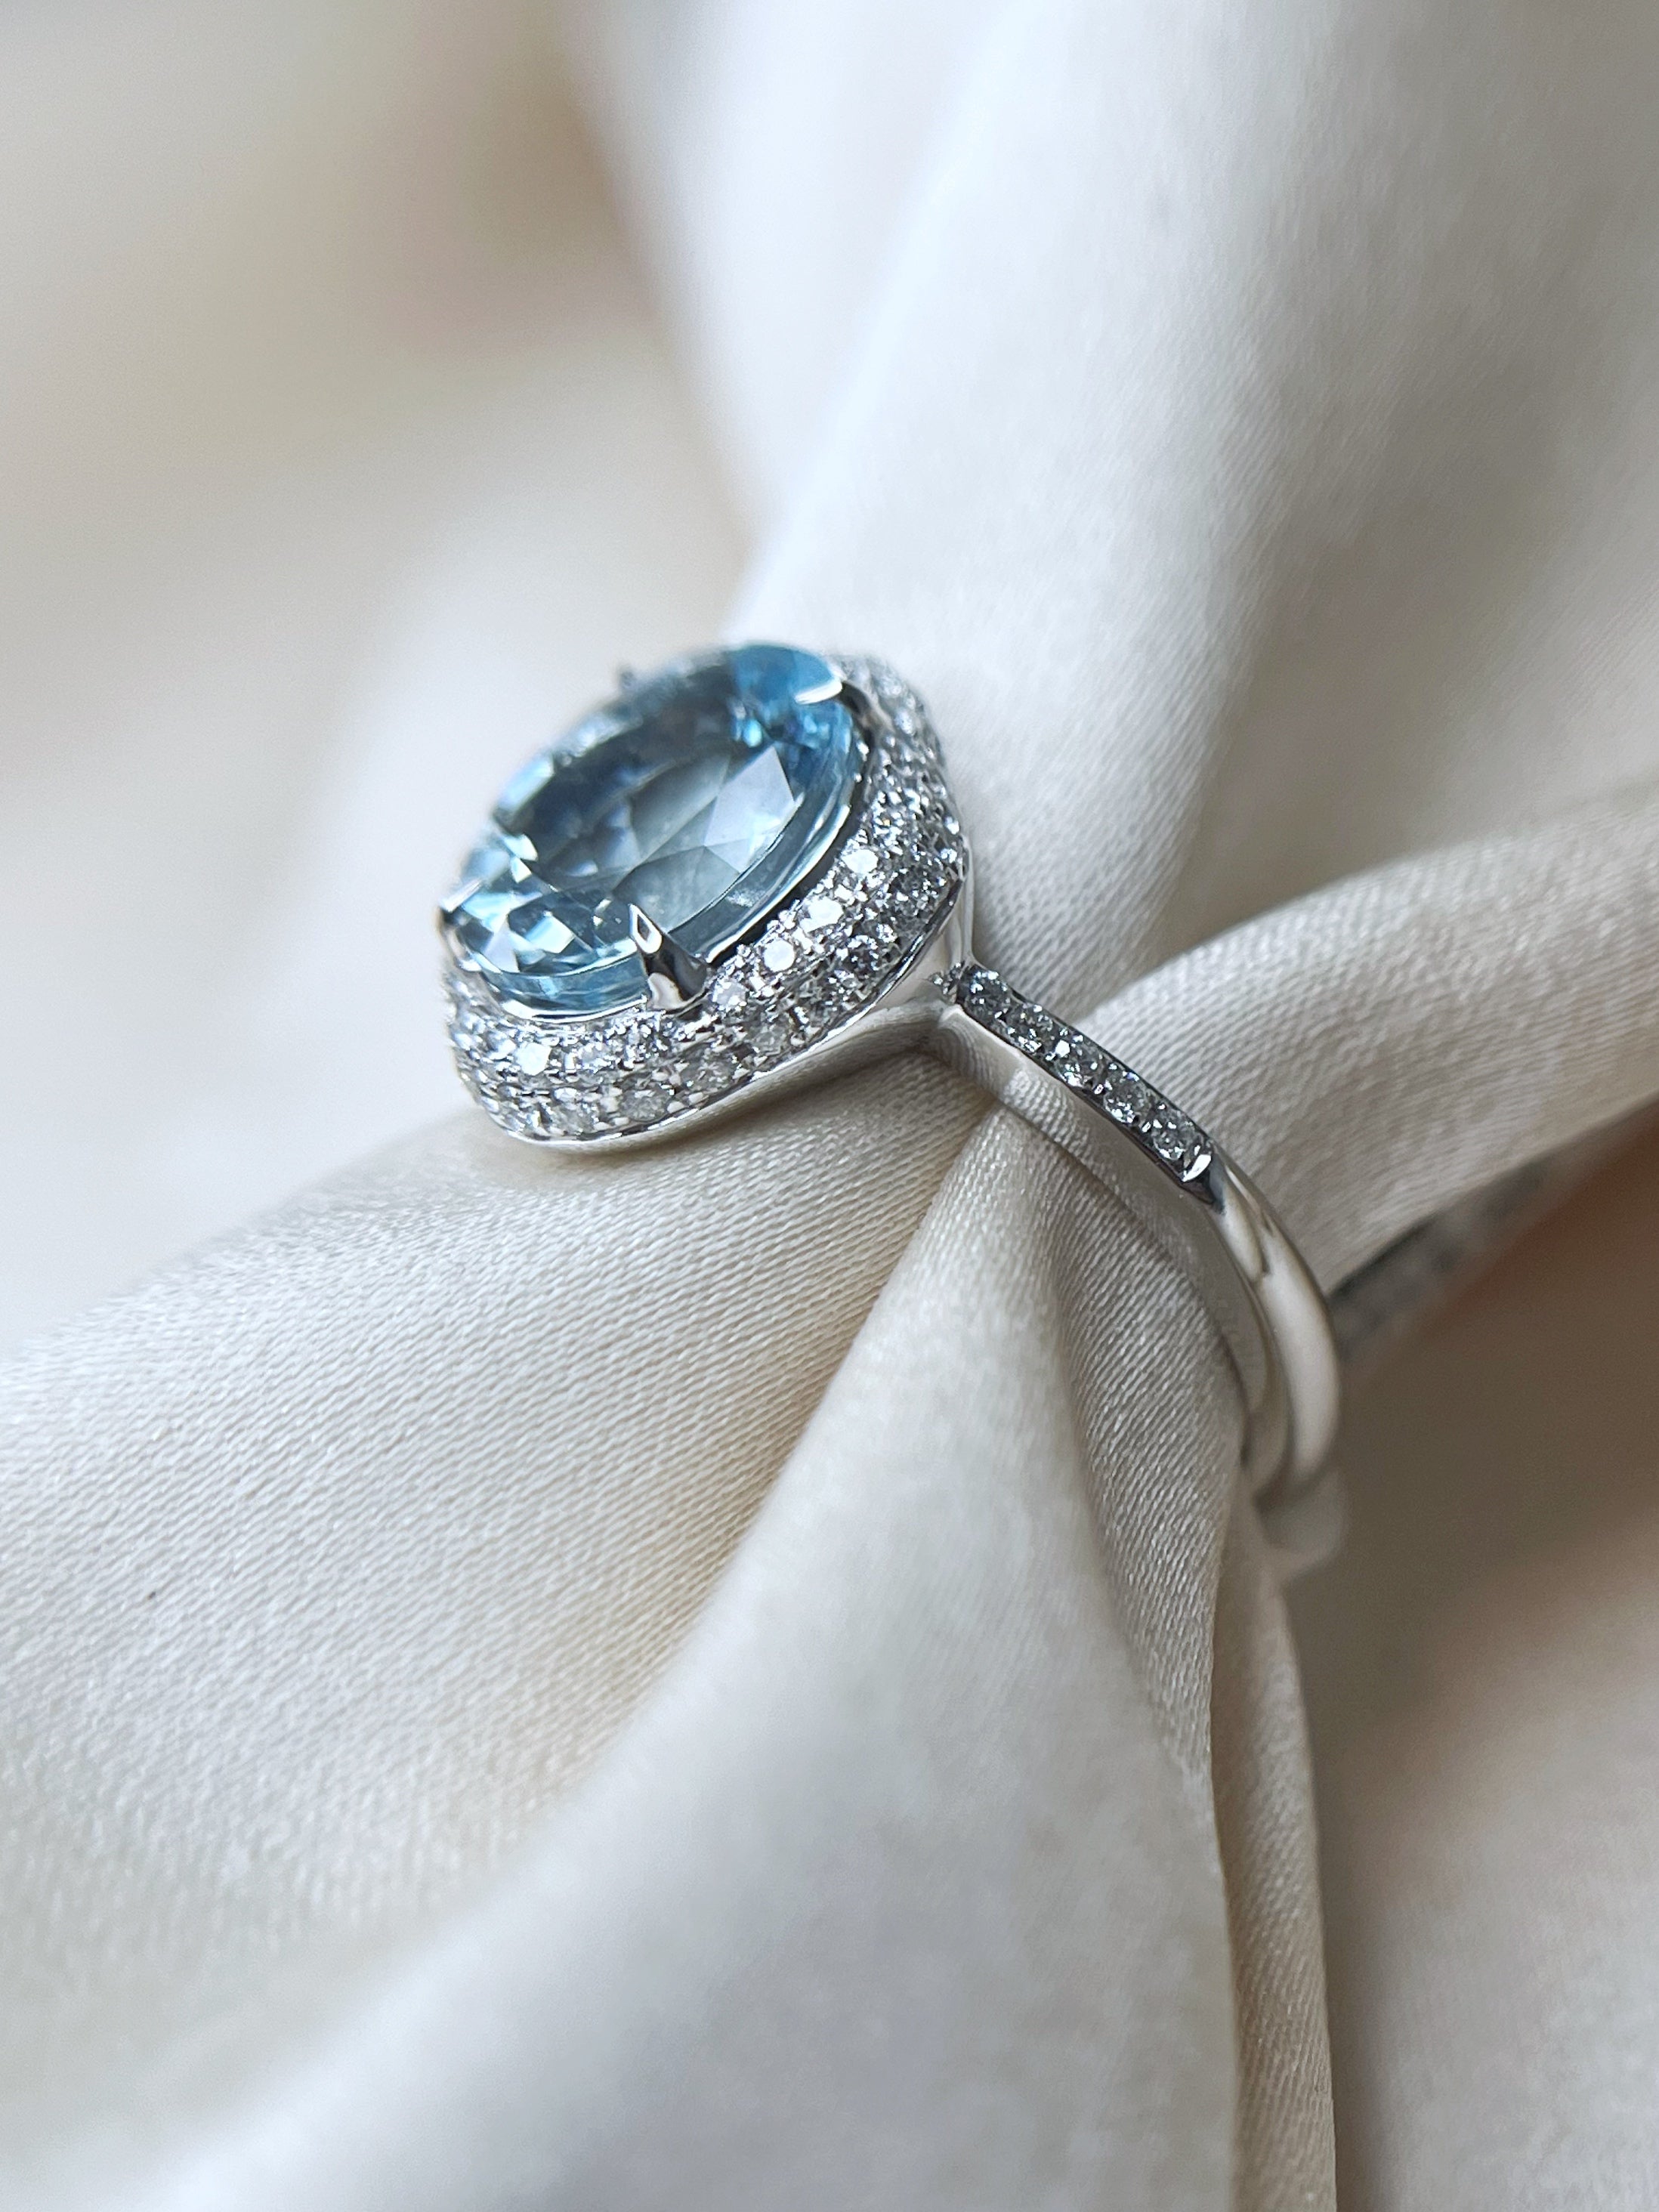 Blue Topaz Ring With Aquamarine In 18Kt Yellow Gold | Mohan Jewellery